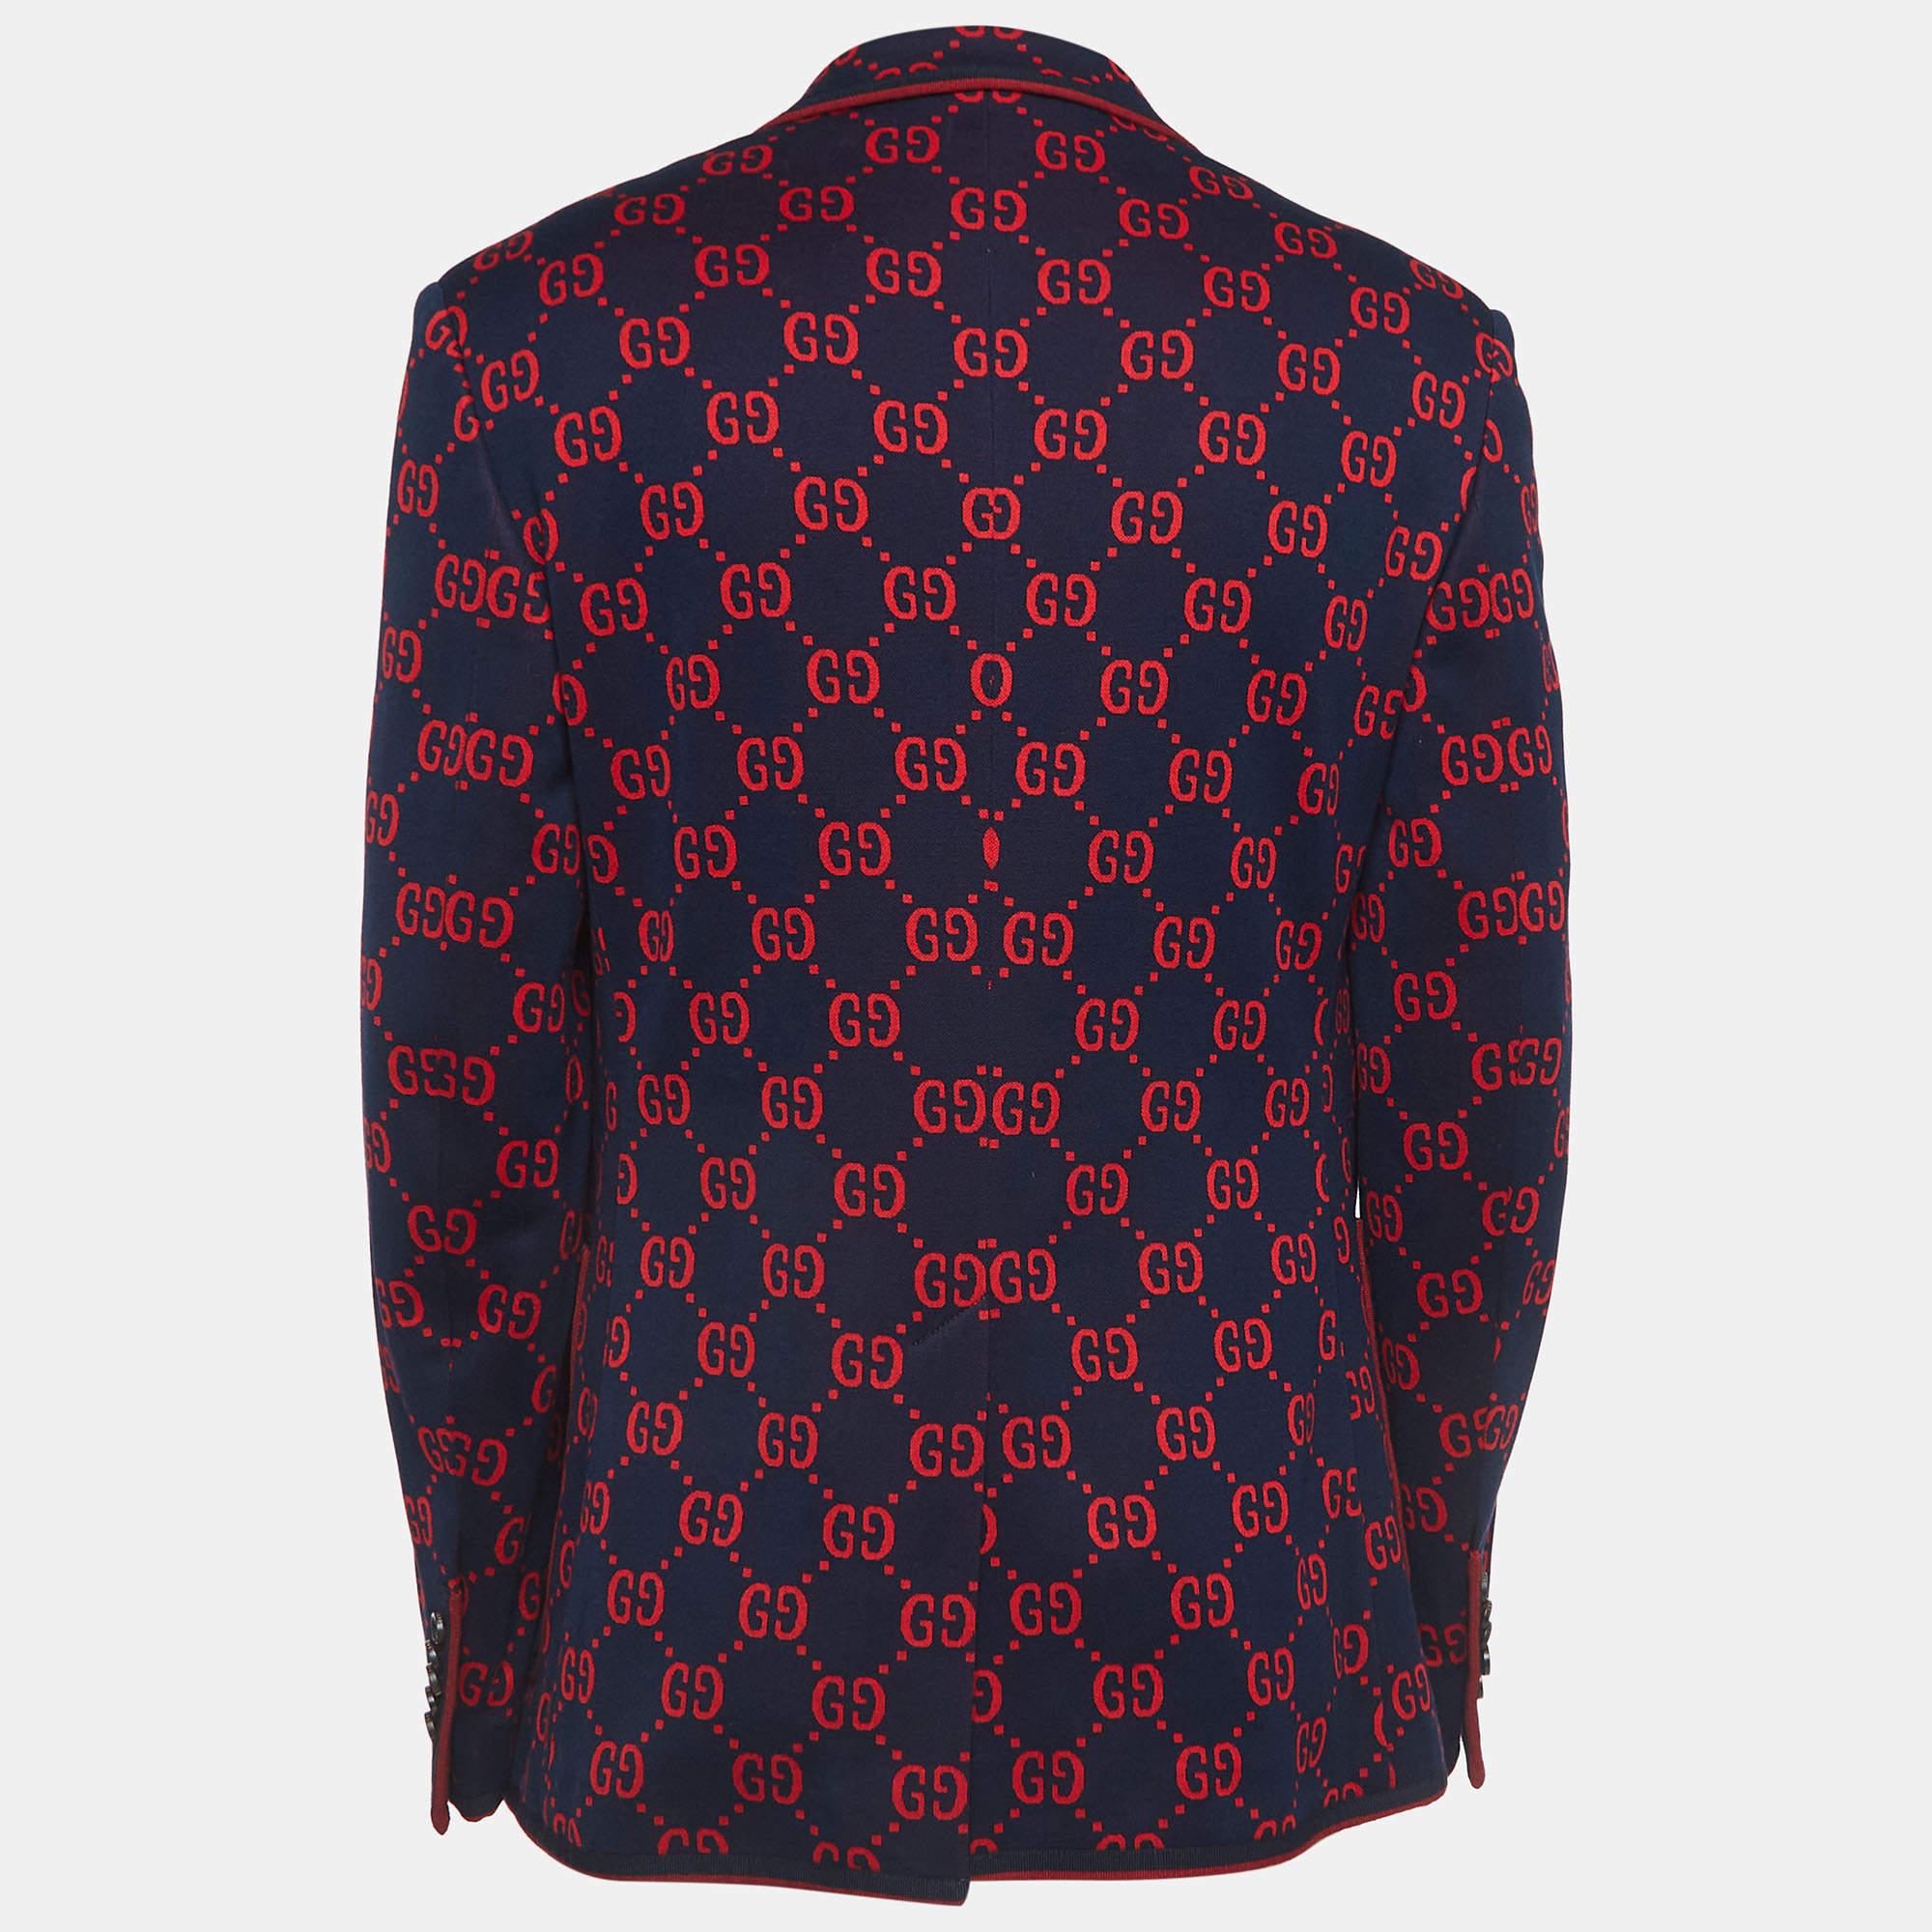 The Gucci blazer exudes timeless elegance and sophistication. Crafted with meticulous attention to detail, its rich navy blue hue is complemented by striking red jacquard accents, adding a touch of opulence. This versatile piece seamlessly combines